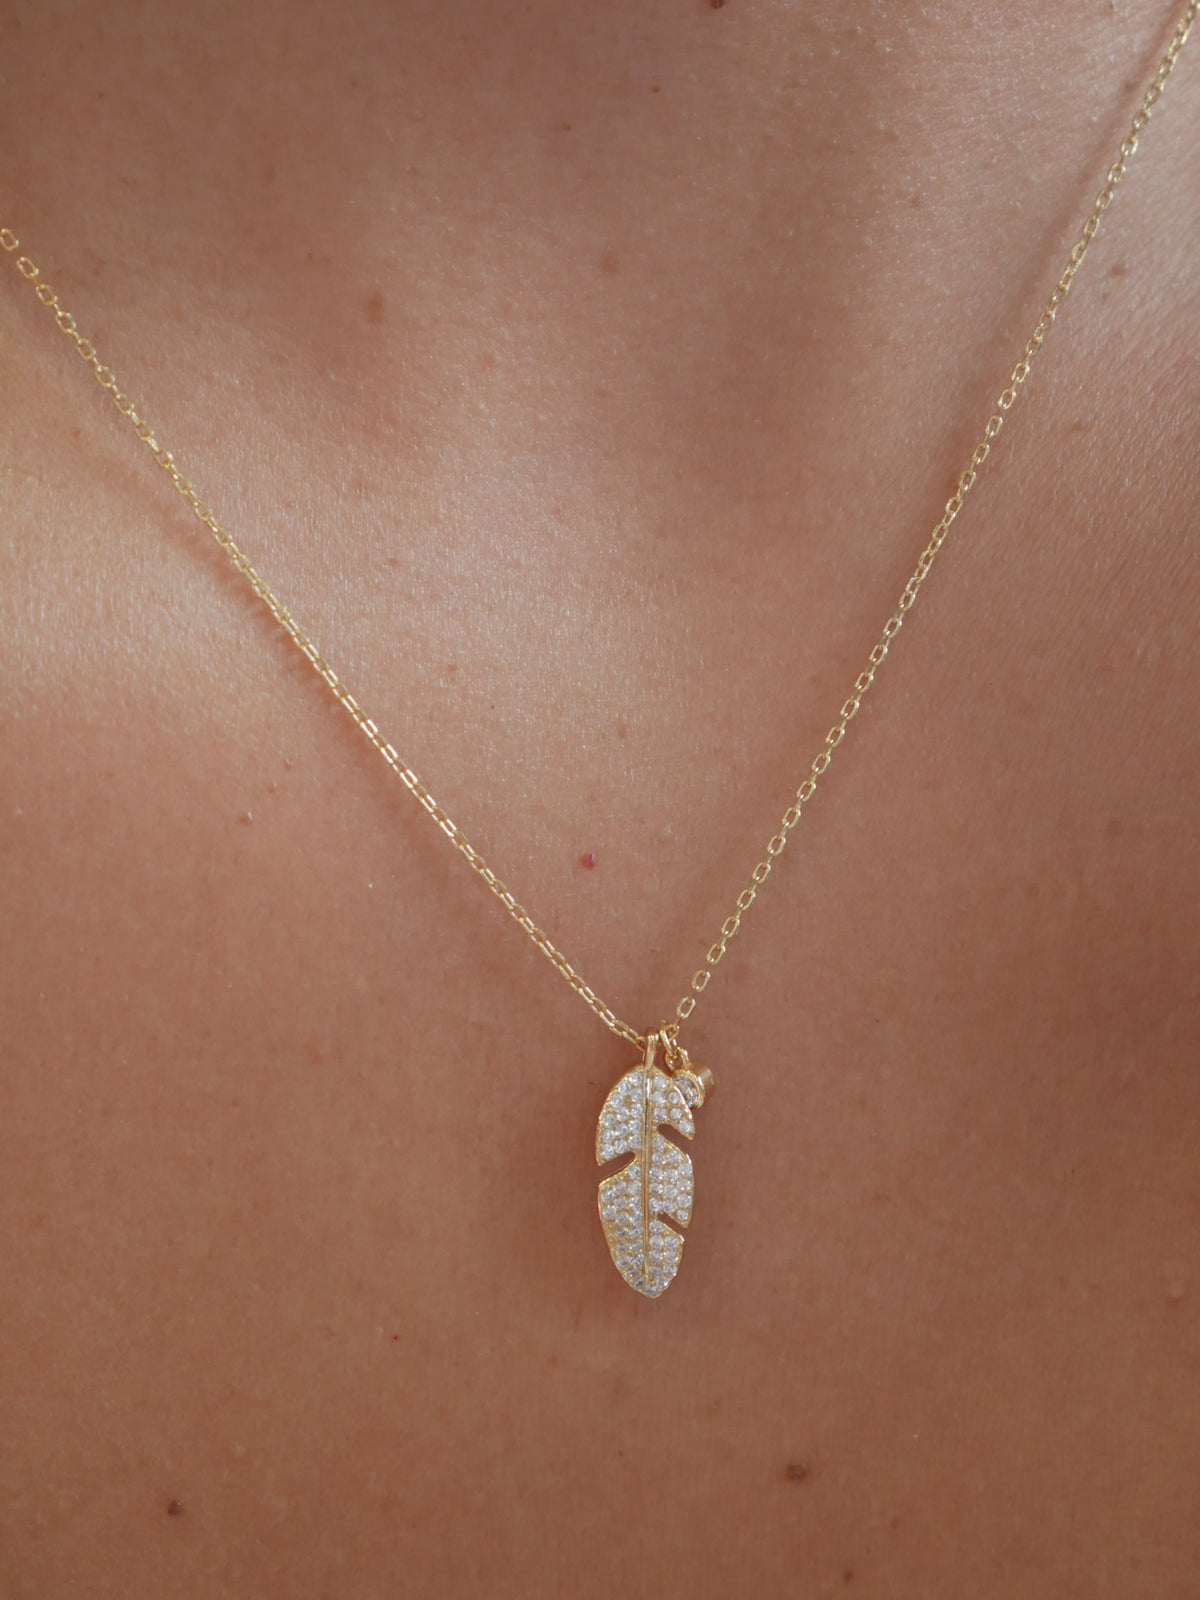 Leaf Necklace, gold plated, .925 sterling silver, waterproof designer luxury dainty minimalist necklaces, cubic zirconia, simulated diamonds, cz's, rhinestone,everyday necklaces for work, gift ideas, popular influencer style necklaces that wont tarnish, popular jewelry store in Miami, Brickell Kesley Boutique